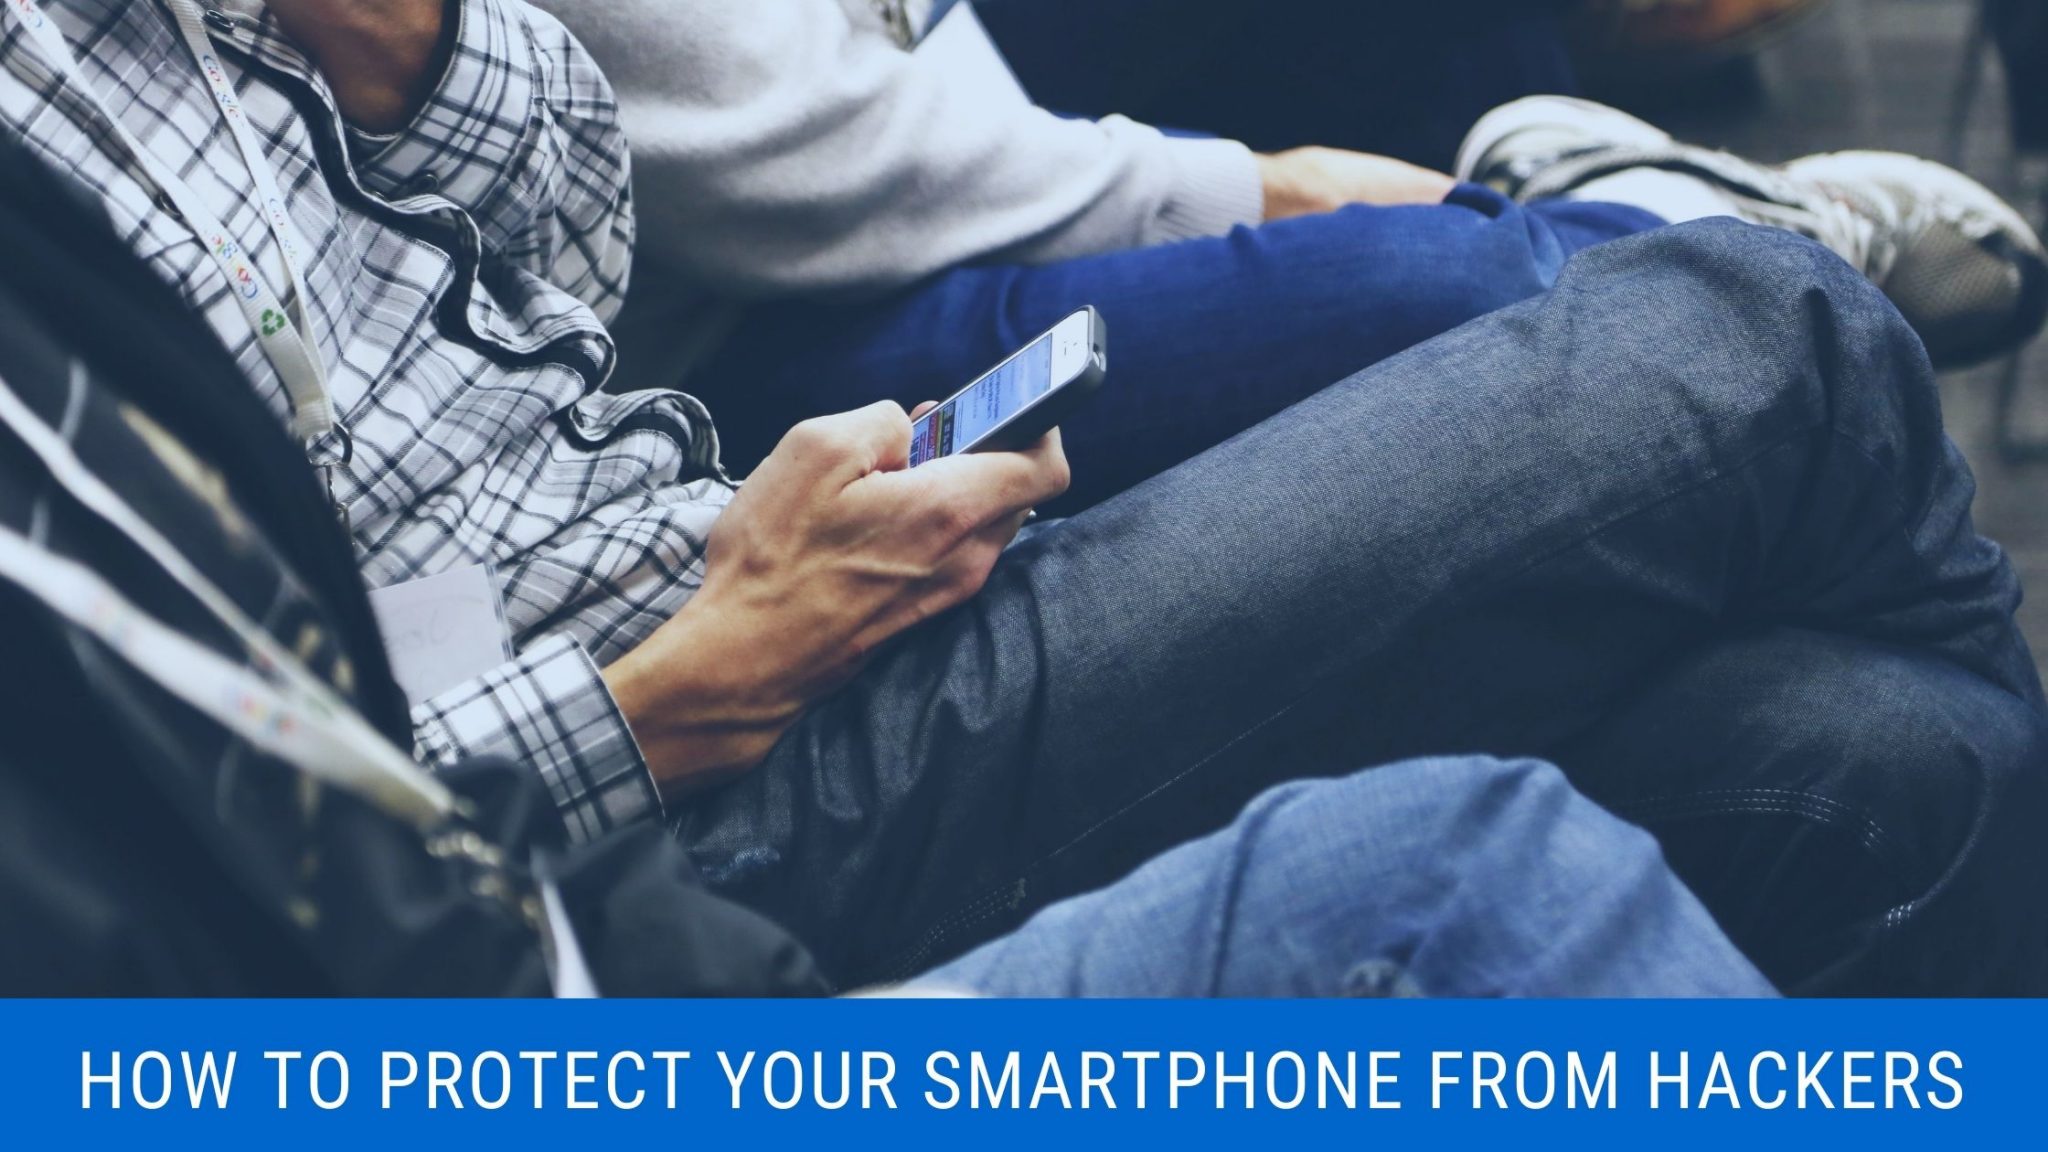 How To Protect Your Smartphone From Hackers